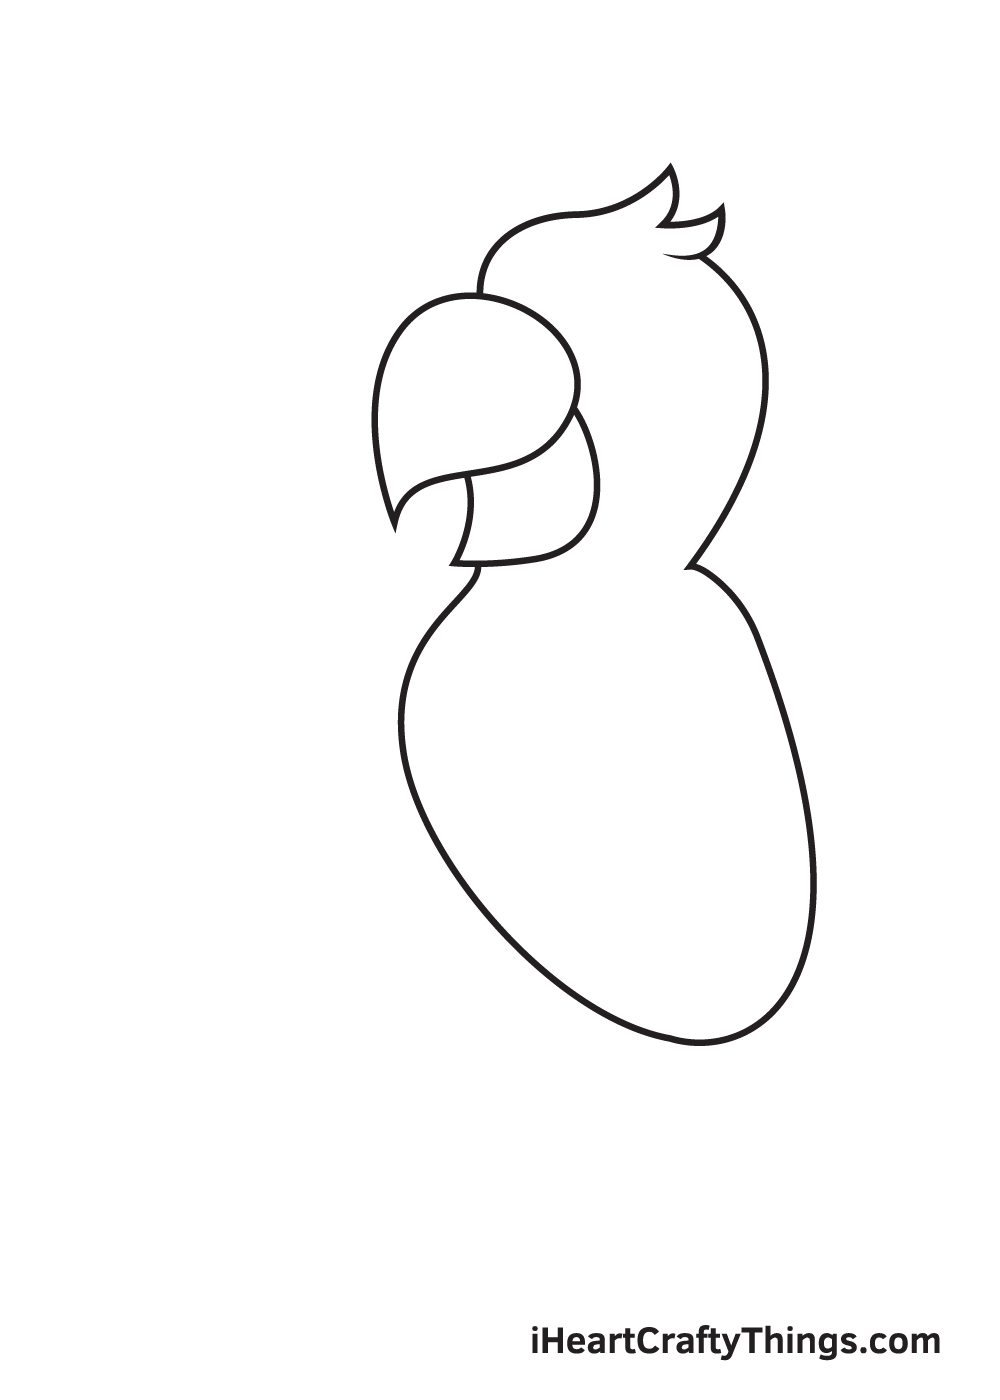 Parrot Drawing - How To Draw A Parrot Step By Step